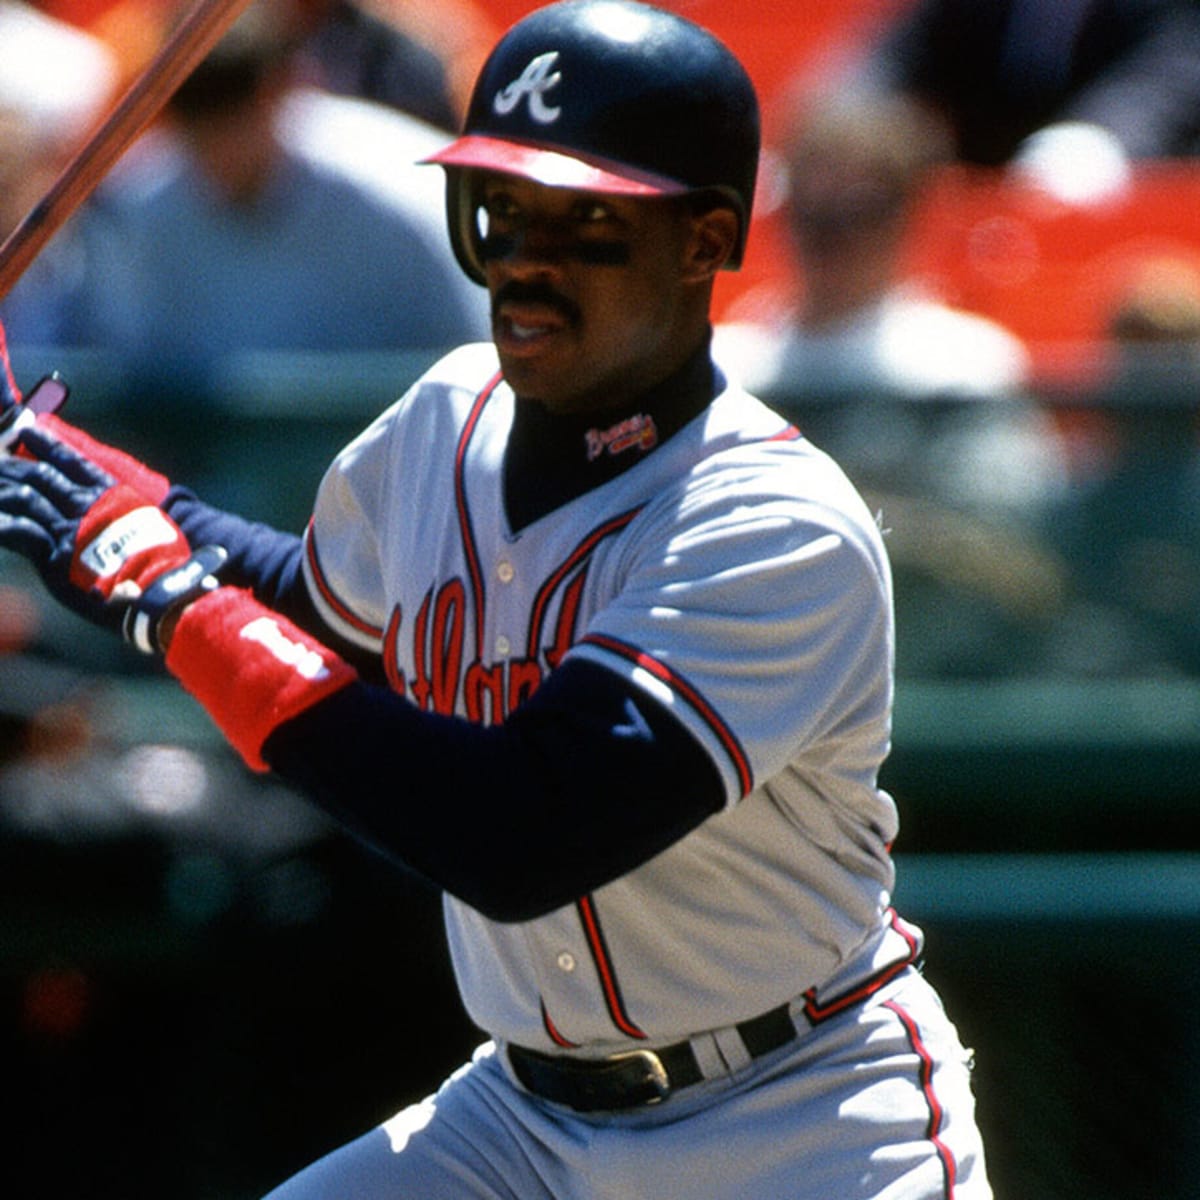 Fred McGriff: Consistently productive but short of Hall of Fame